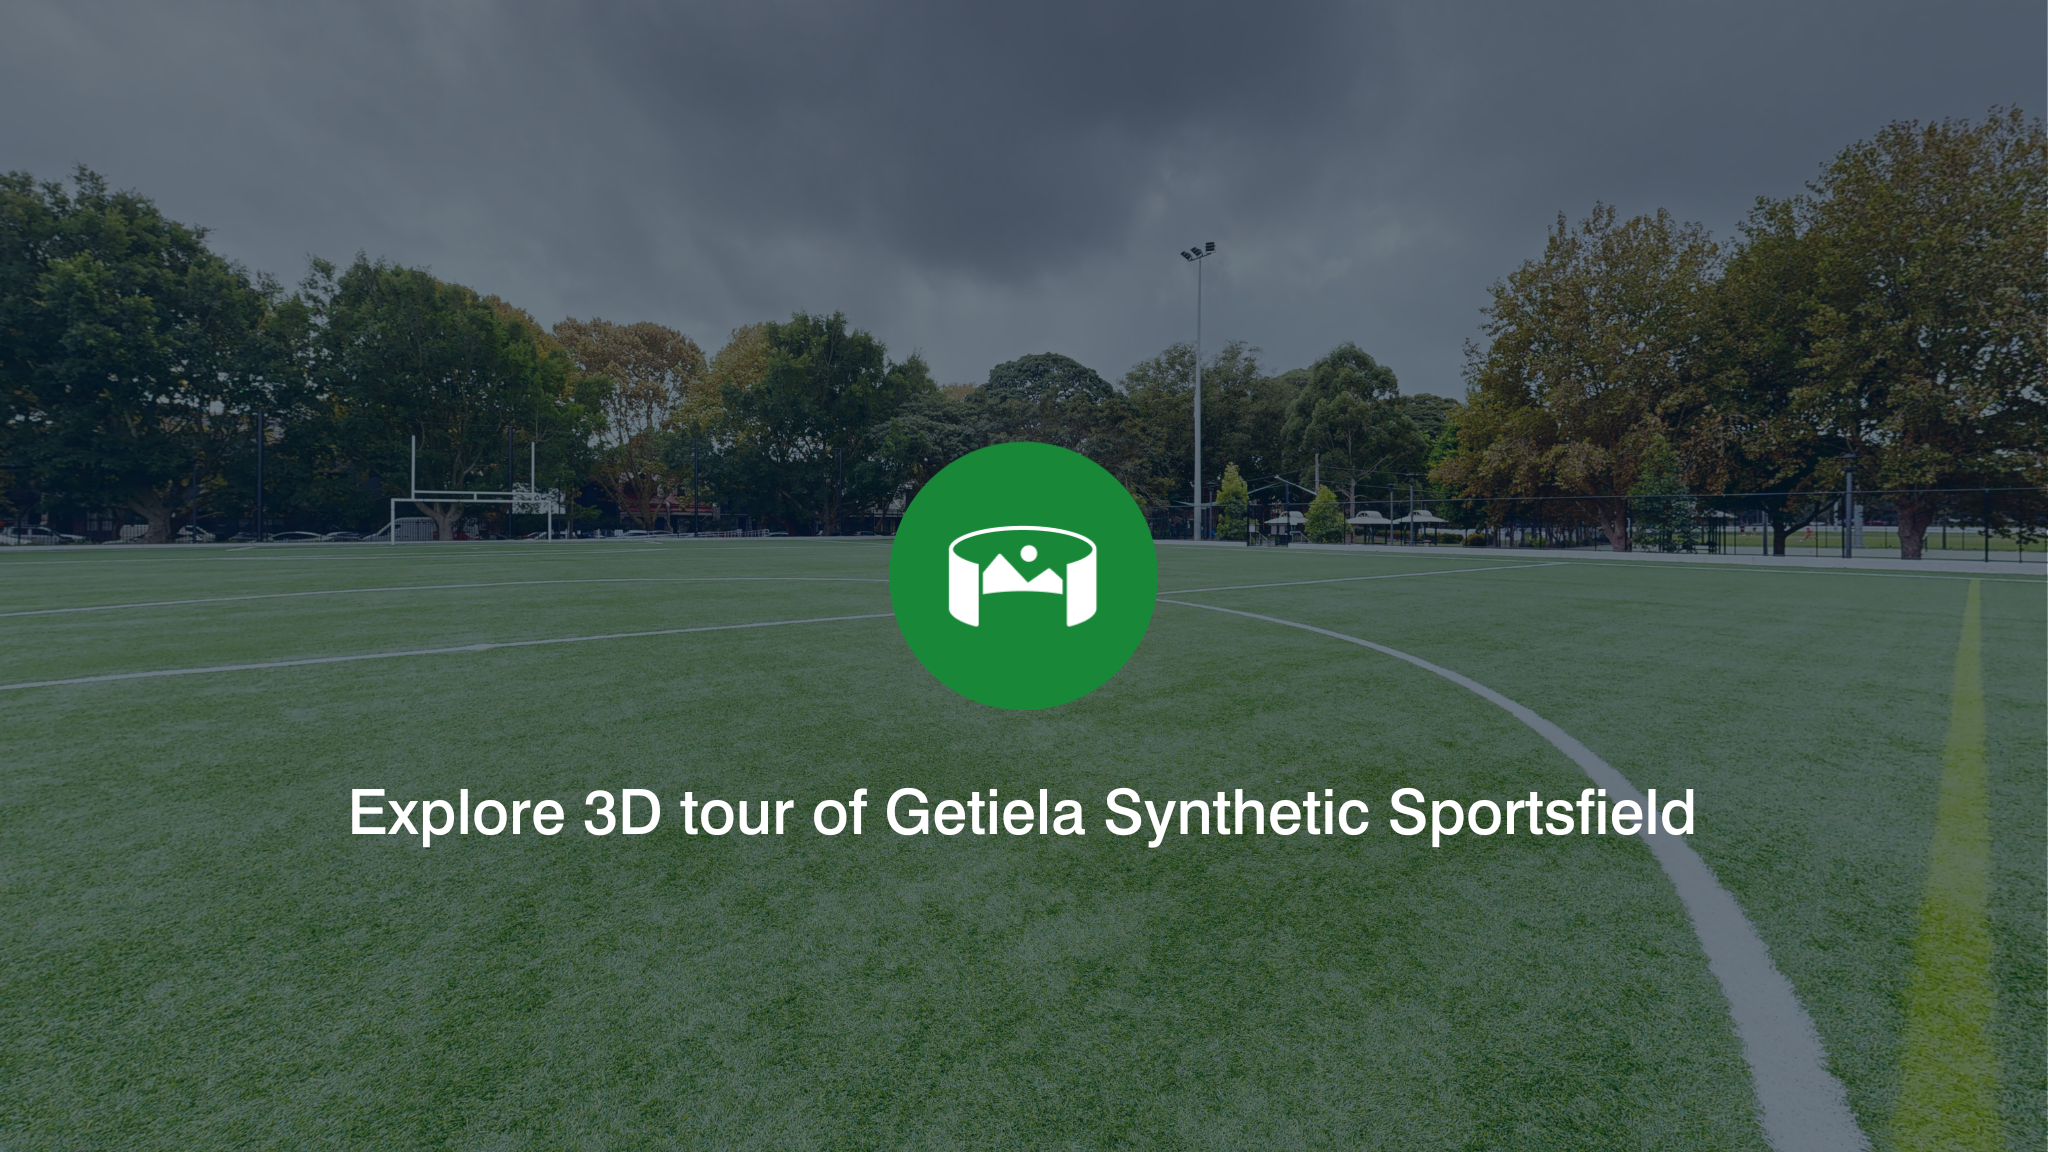 A sports field overlayed with a green icon and the words Explore 3D tour of Getiela Synthetic Sportsfield.